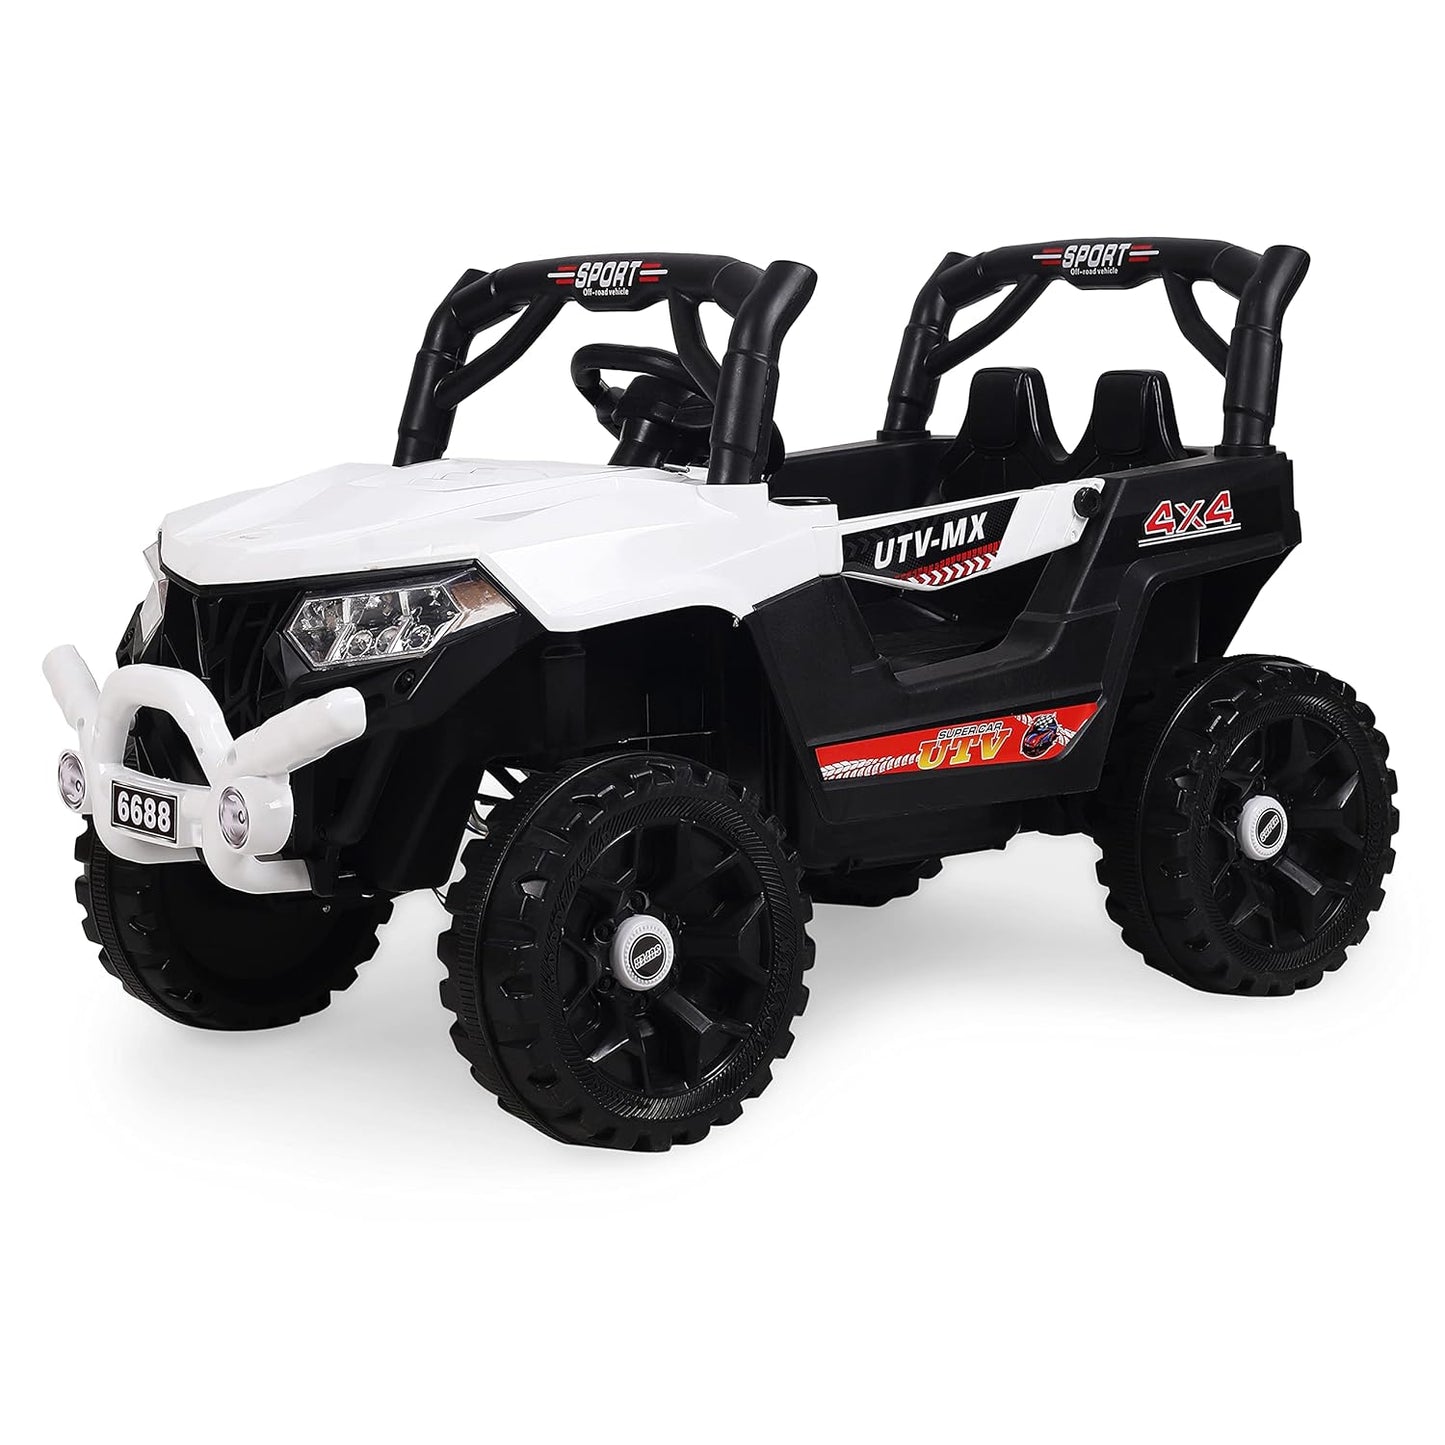 GettBoles 907 4X4 Electric Rechargeable Ride on Jeep for Kids of Age 2 to 4 Years- The Battery Operated Kids Jeep with Music, Led Lights and Bluetooth Remote (White)